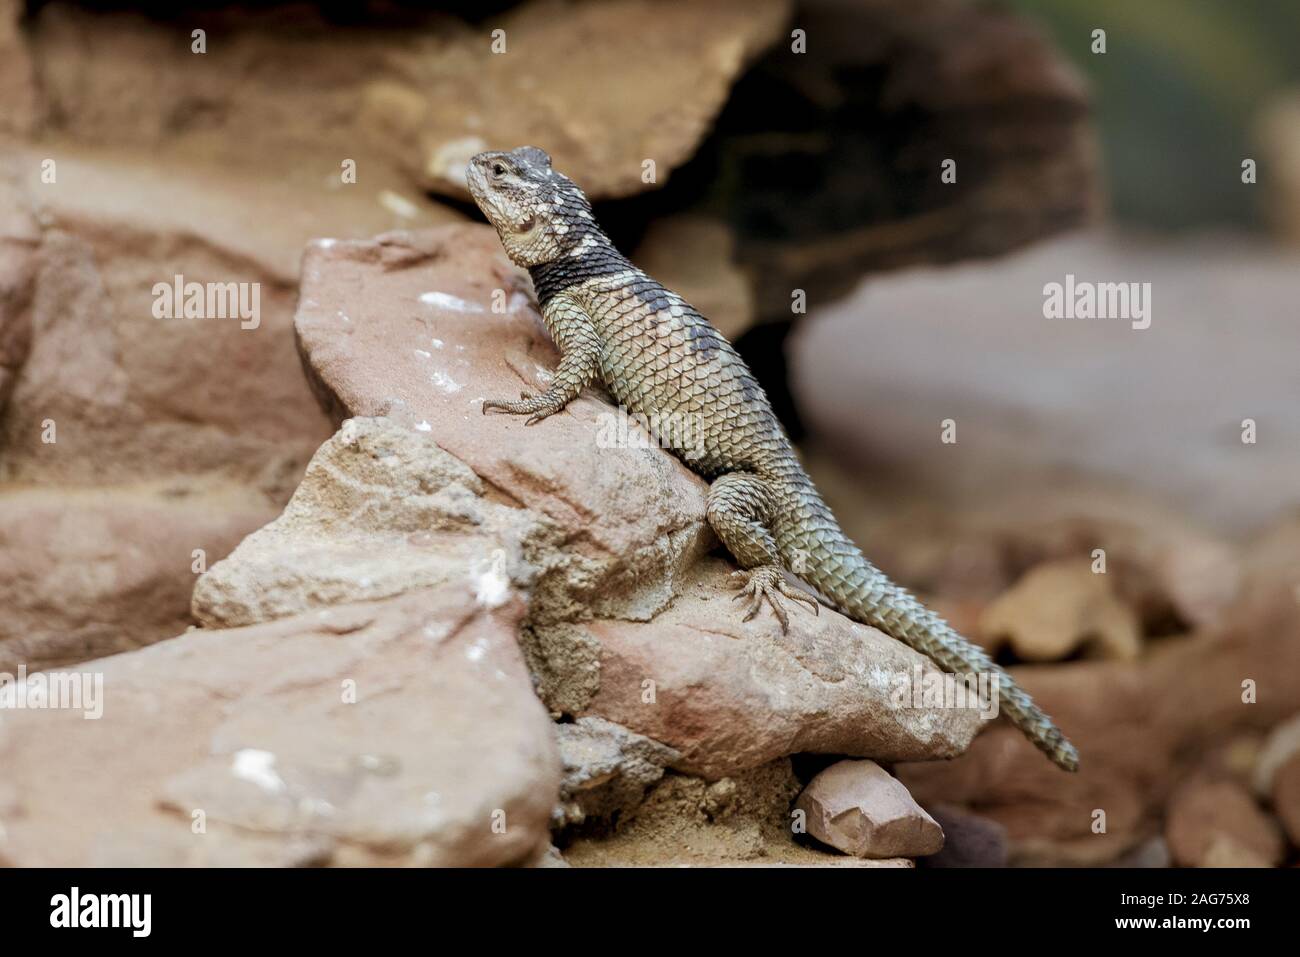 Closeup shot of an agama lizard on a rock with a blurred background Stock Photo